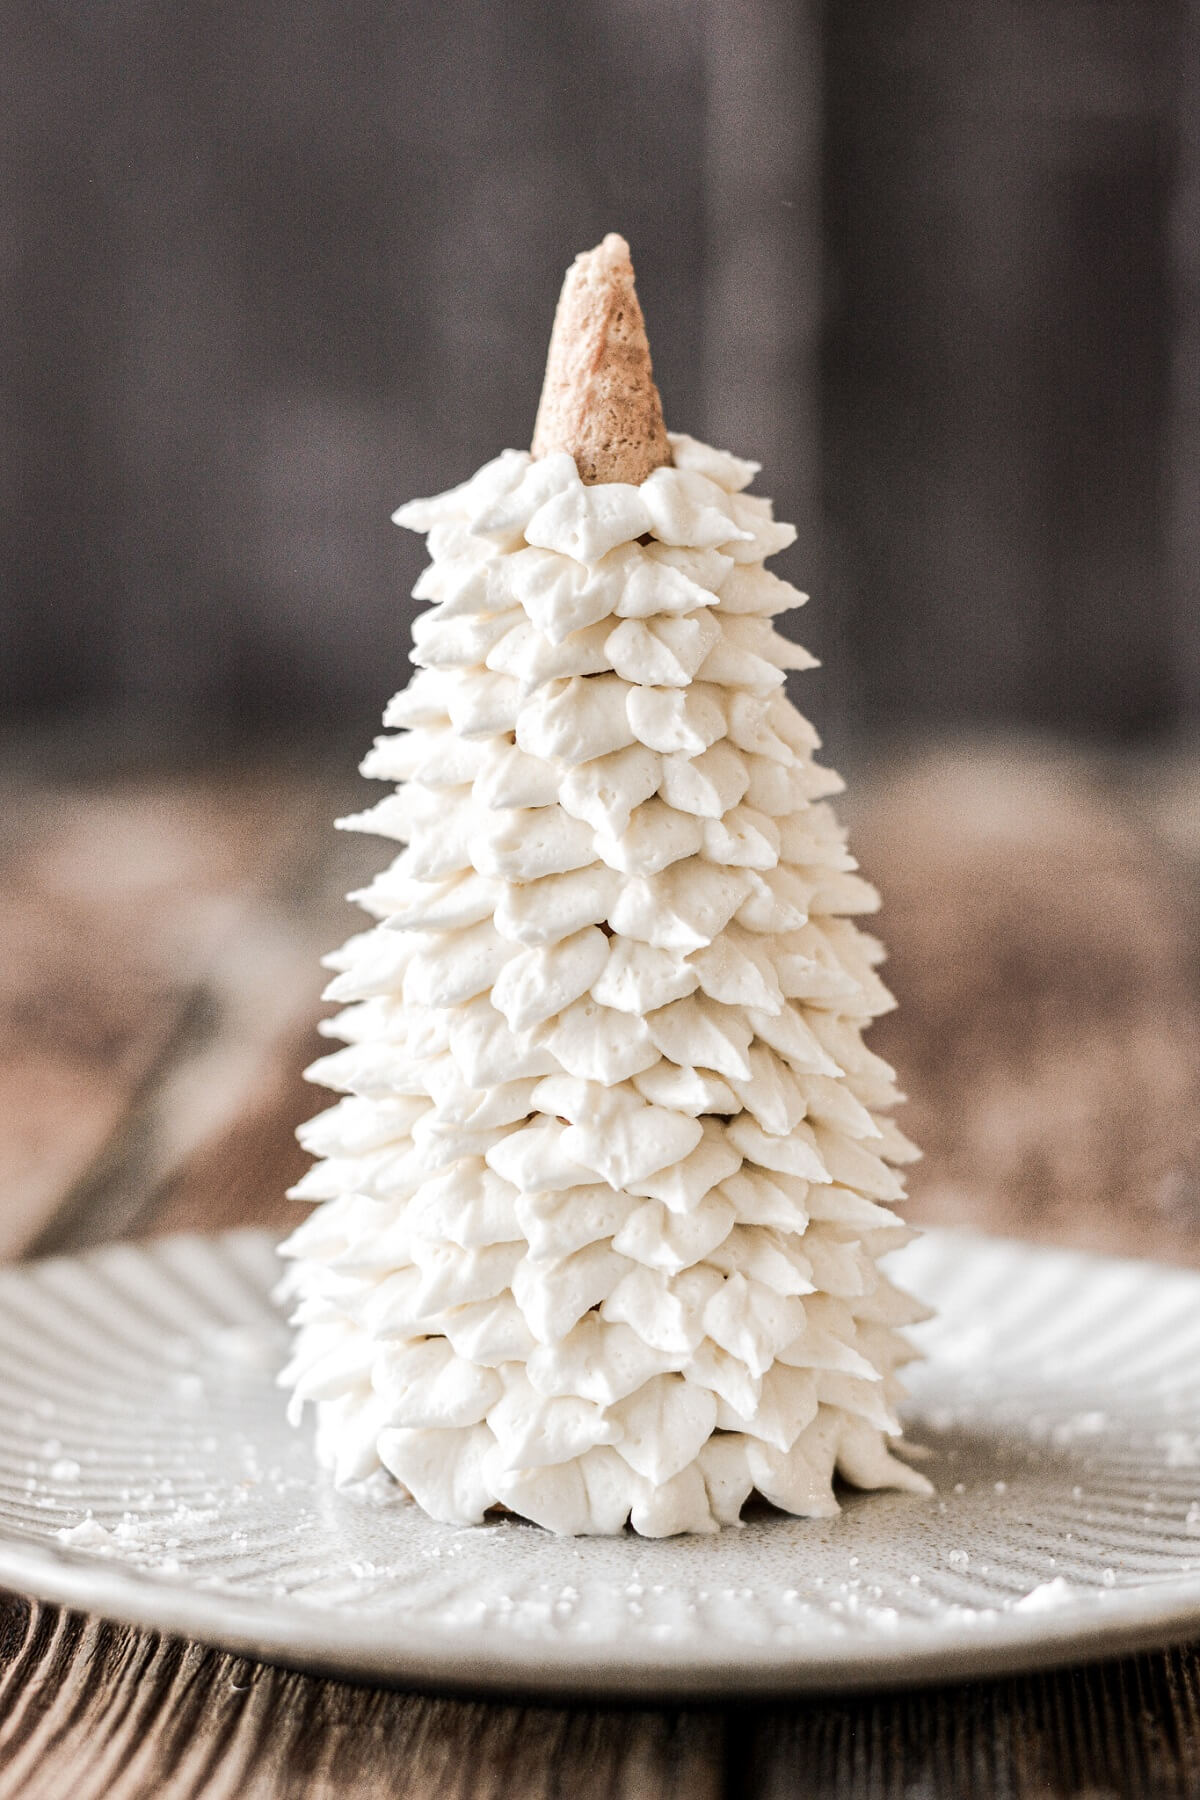 Step 5 for frosting icing cream cones like Christmas trees.